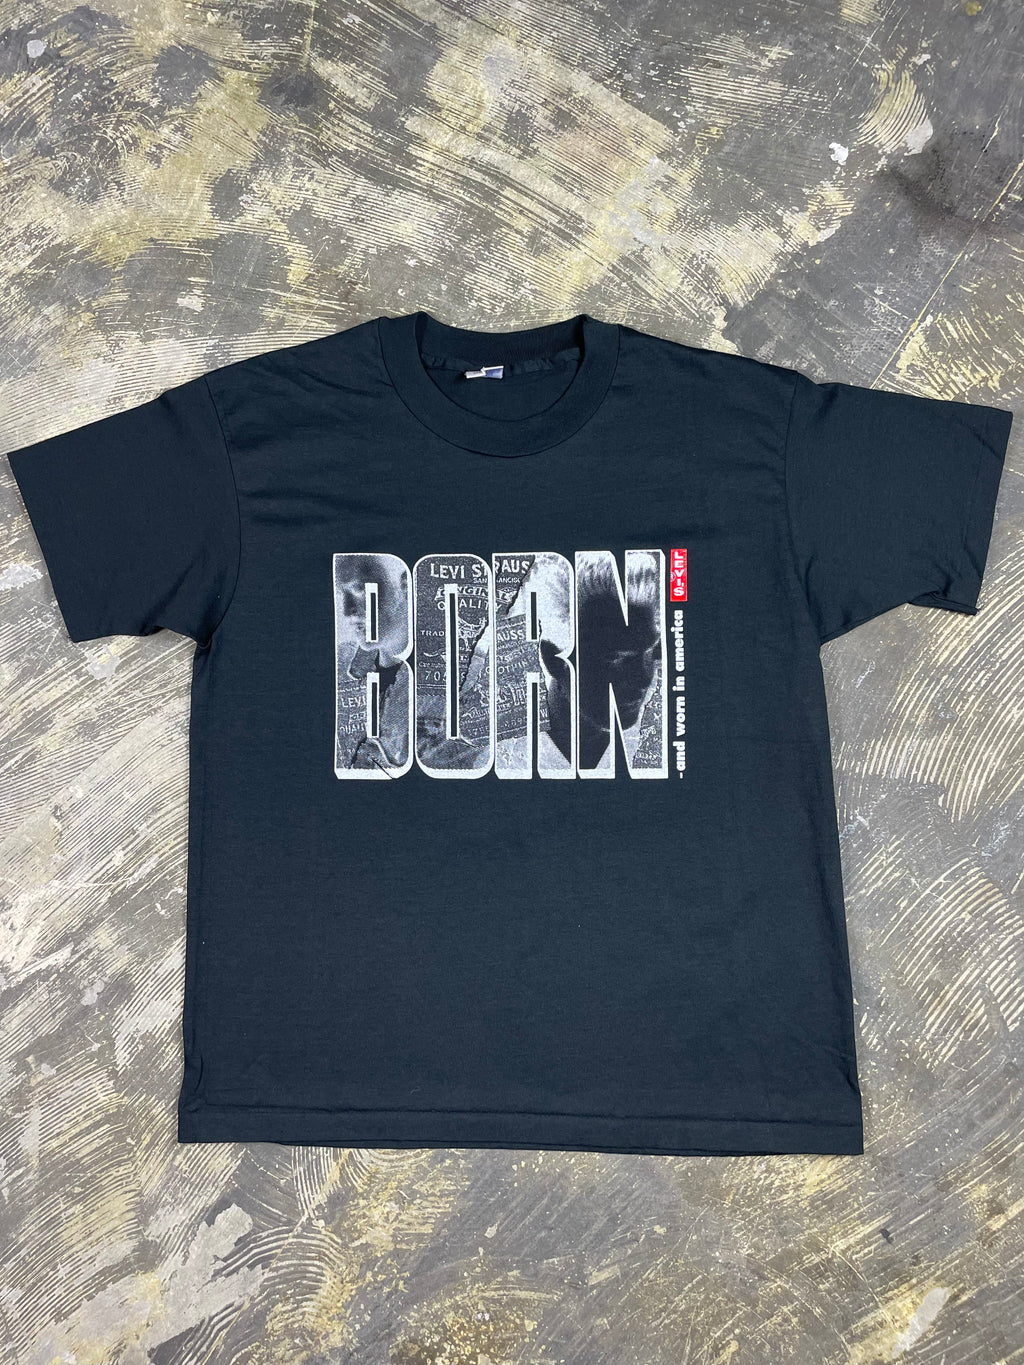 Vintage Levi's "Born and Worn in America" Tee (JYJ-163)